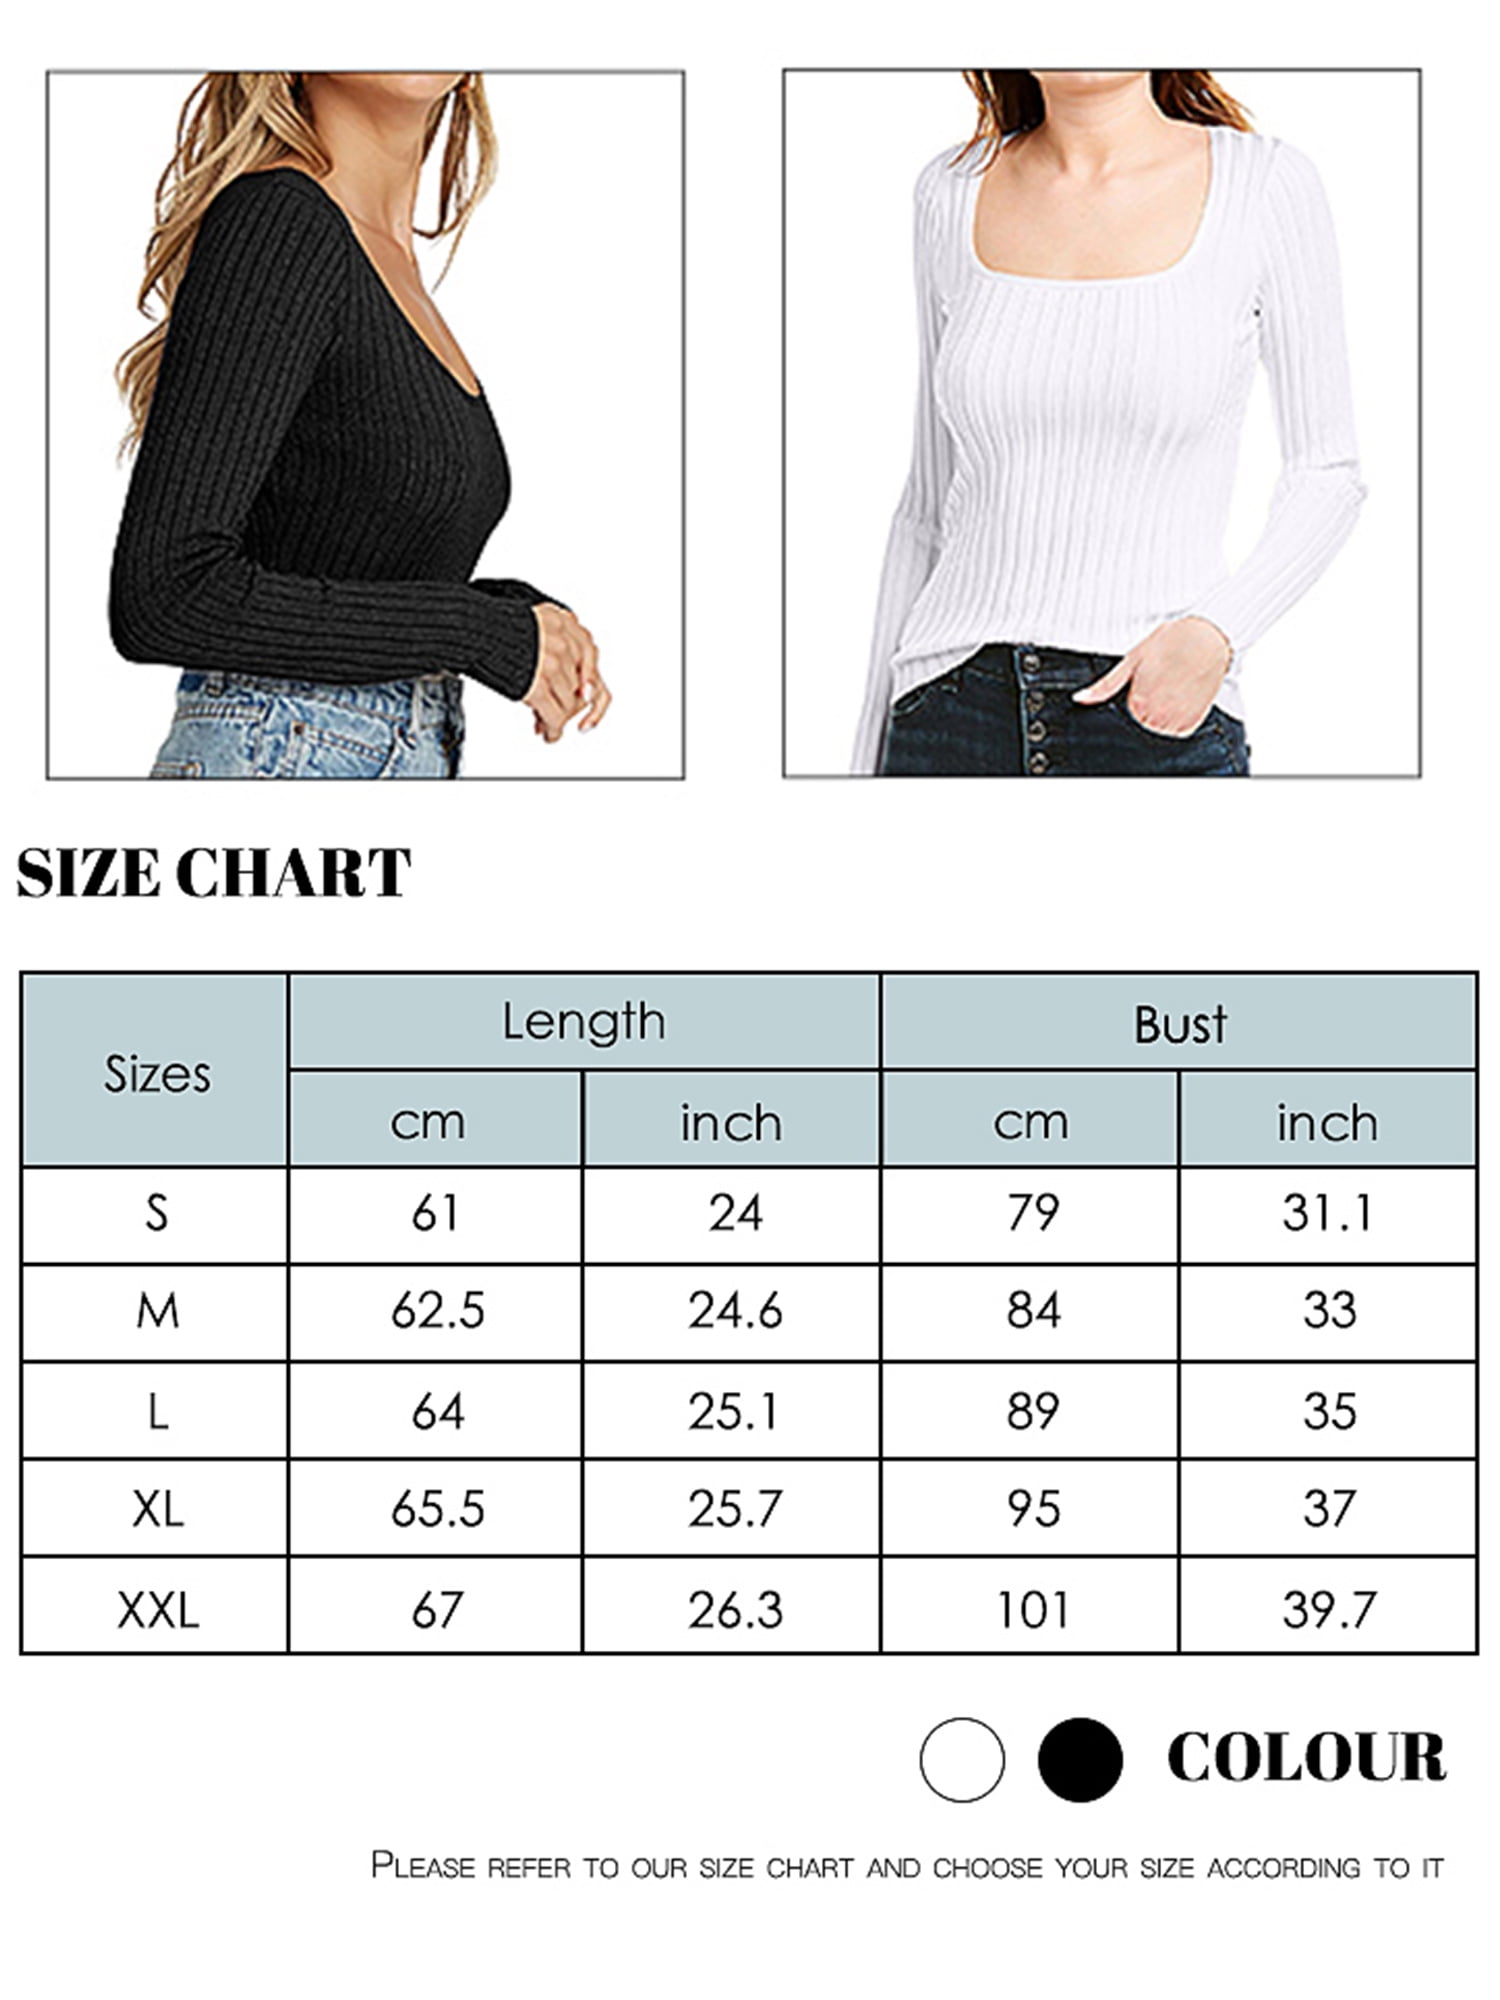 ANYFIT WEAR Long Sleeve Fall Blouse for Women Square Neck Ribbed Knit  Shirts Top Cozy Warm Pullover Tops Army Green XL 